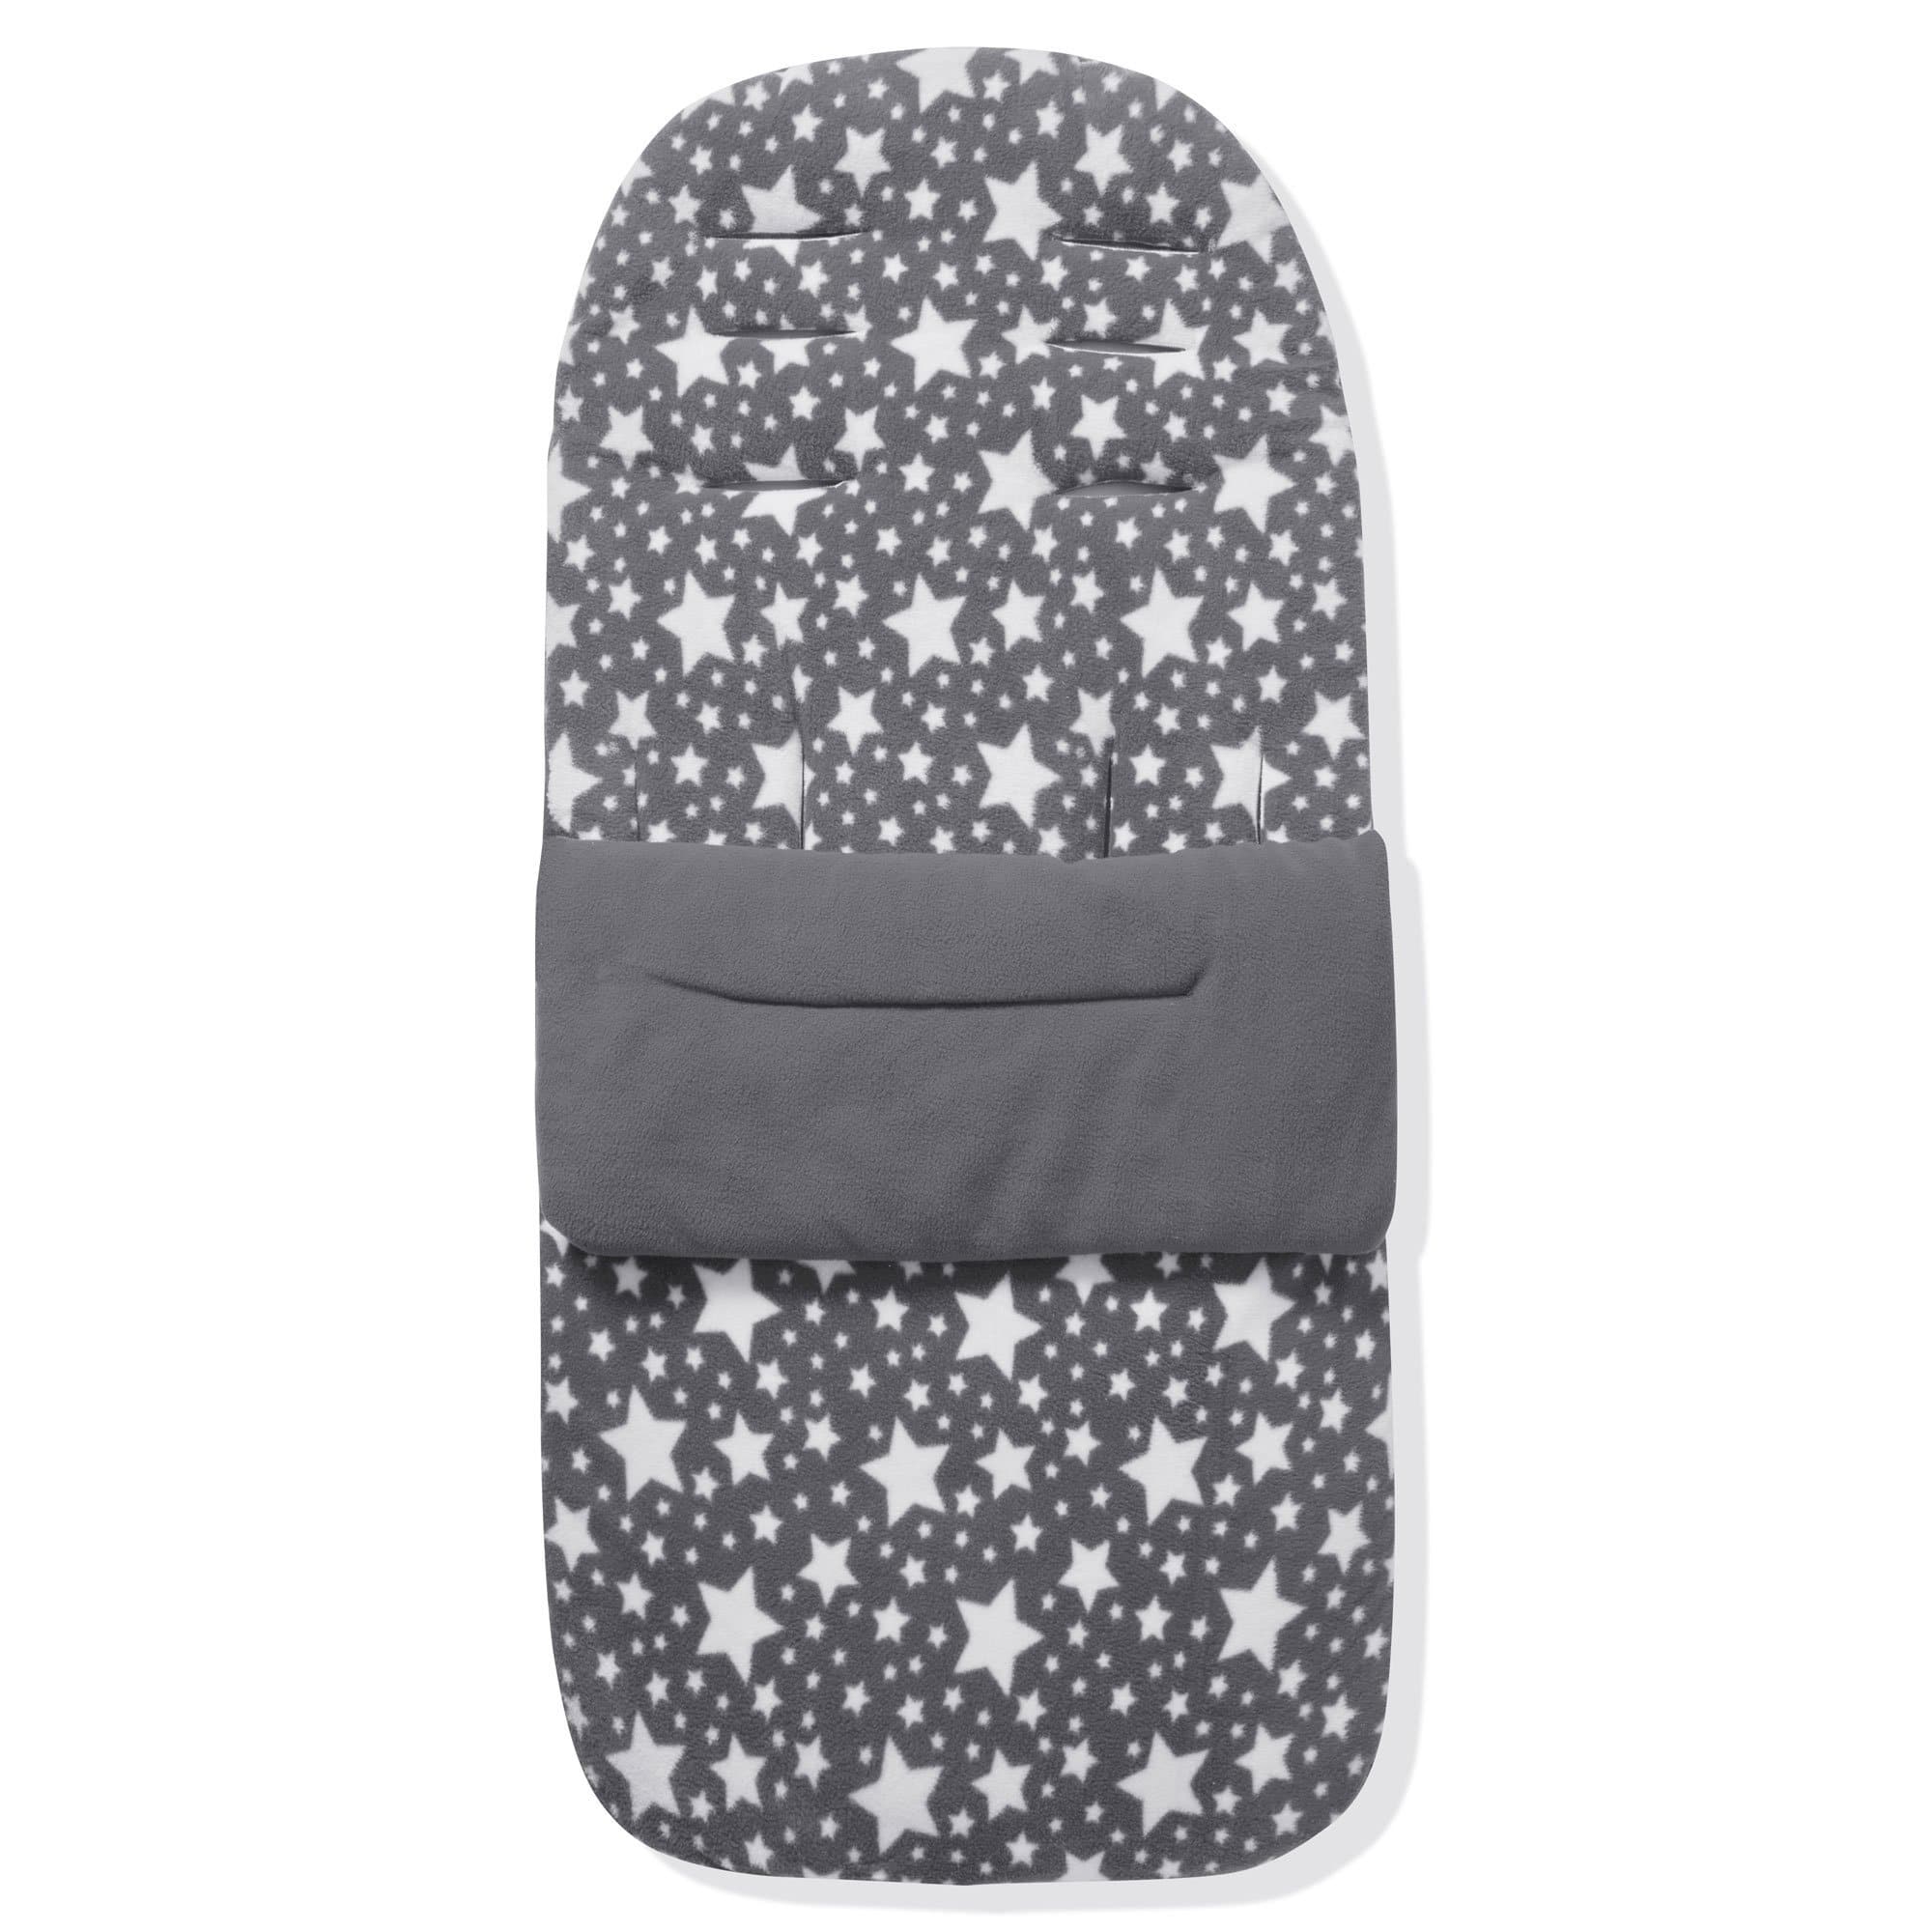 Fleece Footmuff / Cosy Toes Compatible with Mamas & Papas - For Your Little One